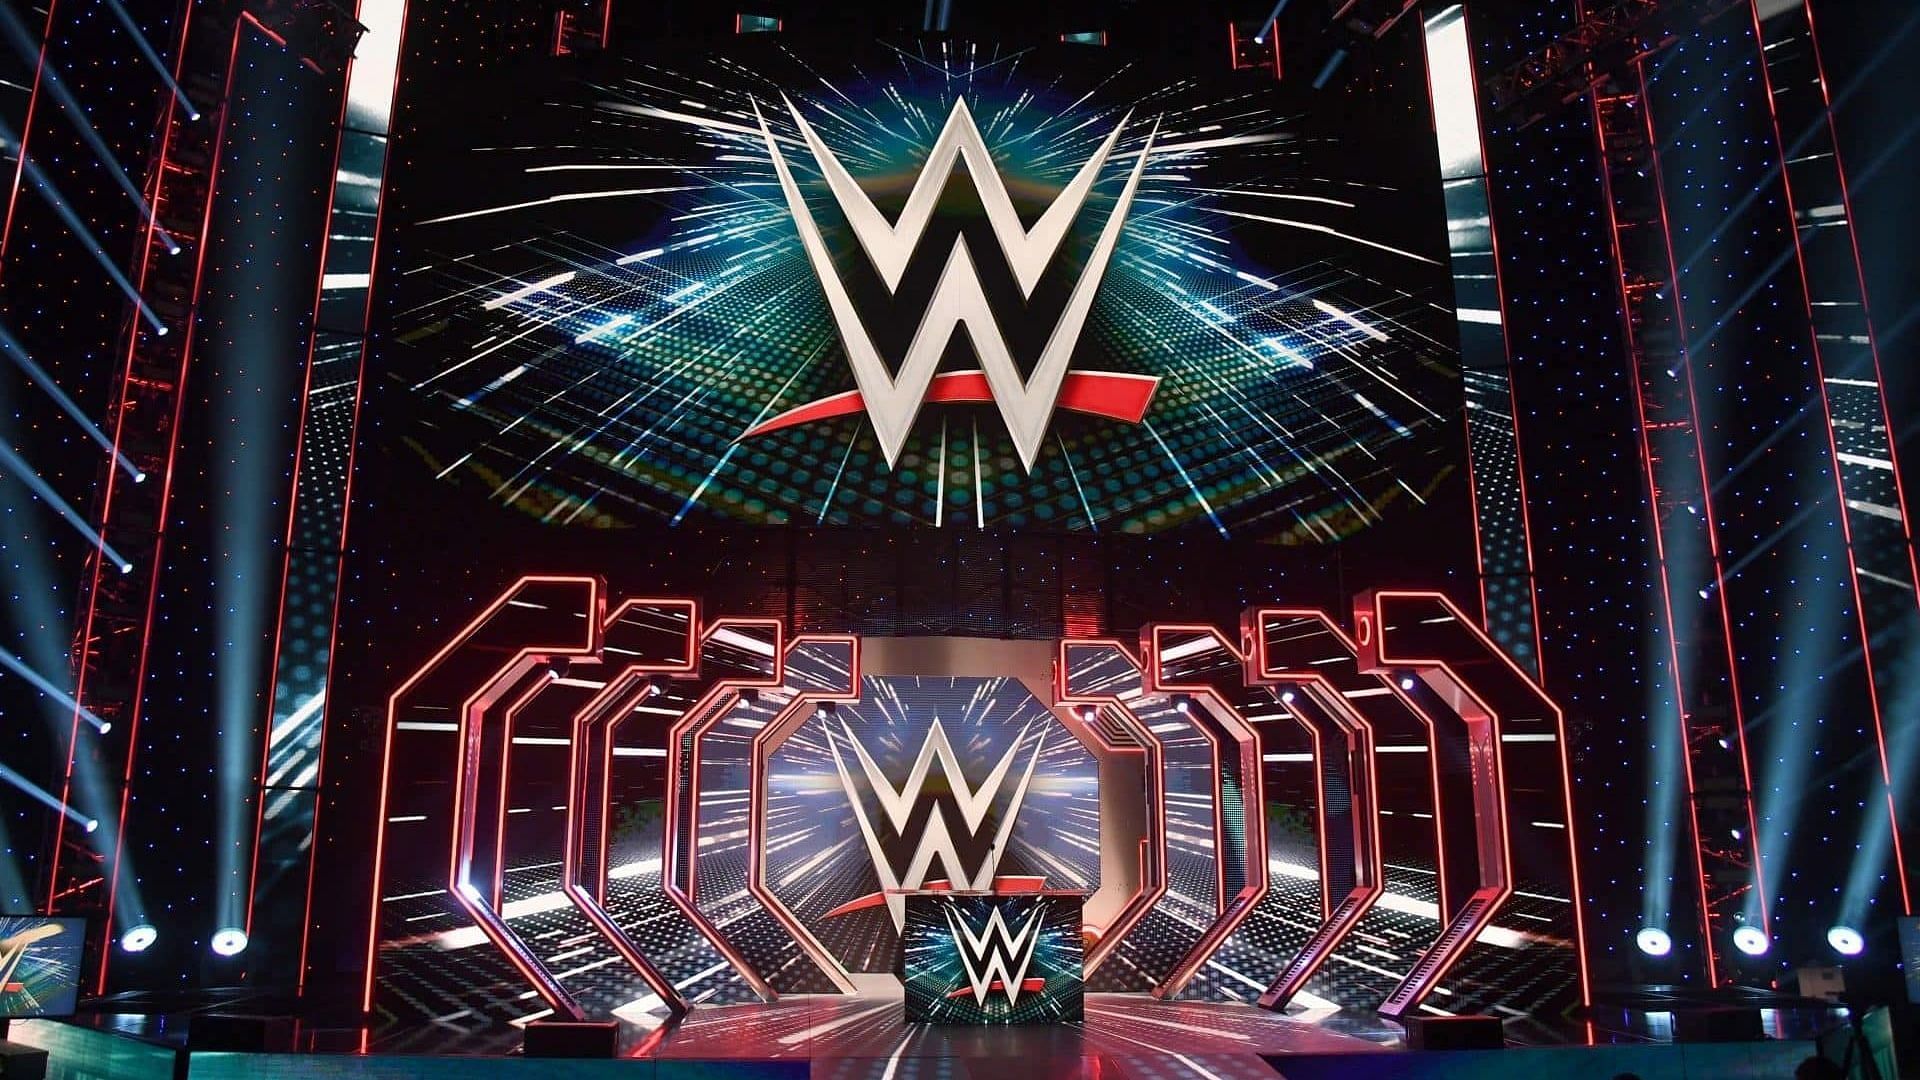 The WWE logos on display at the stage/set area inside arena